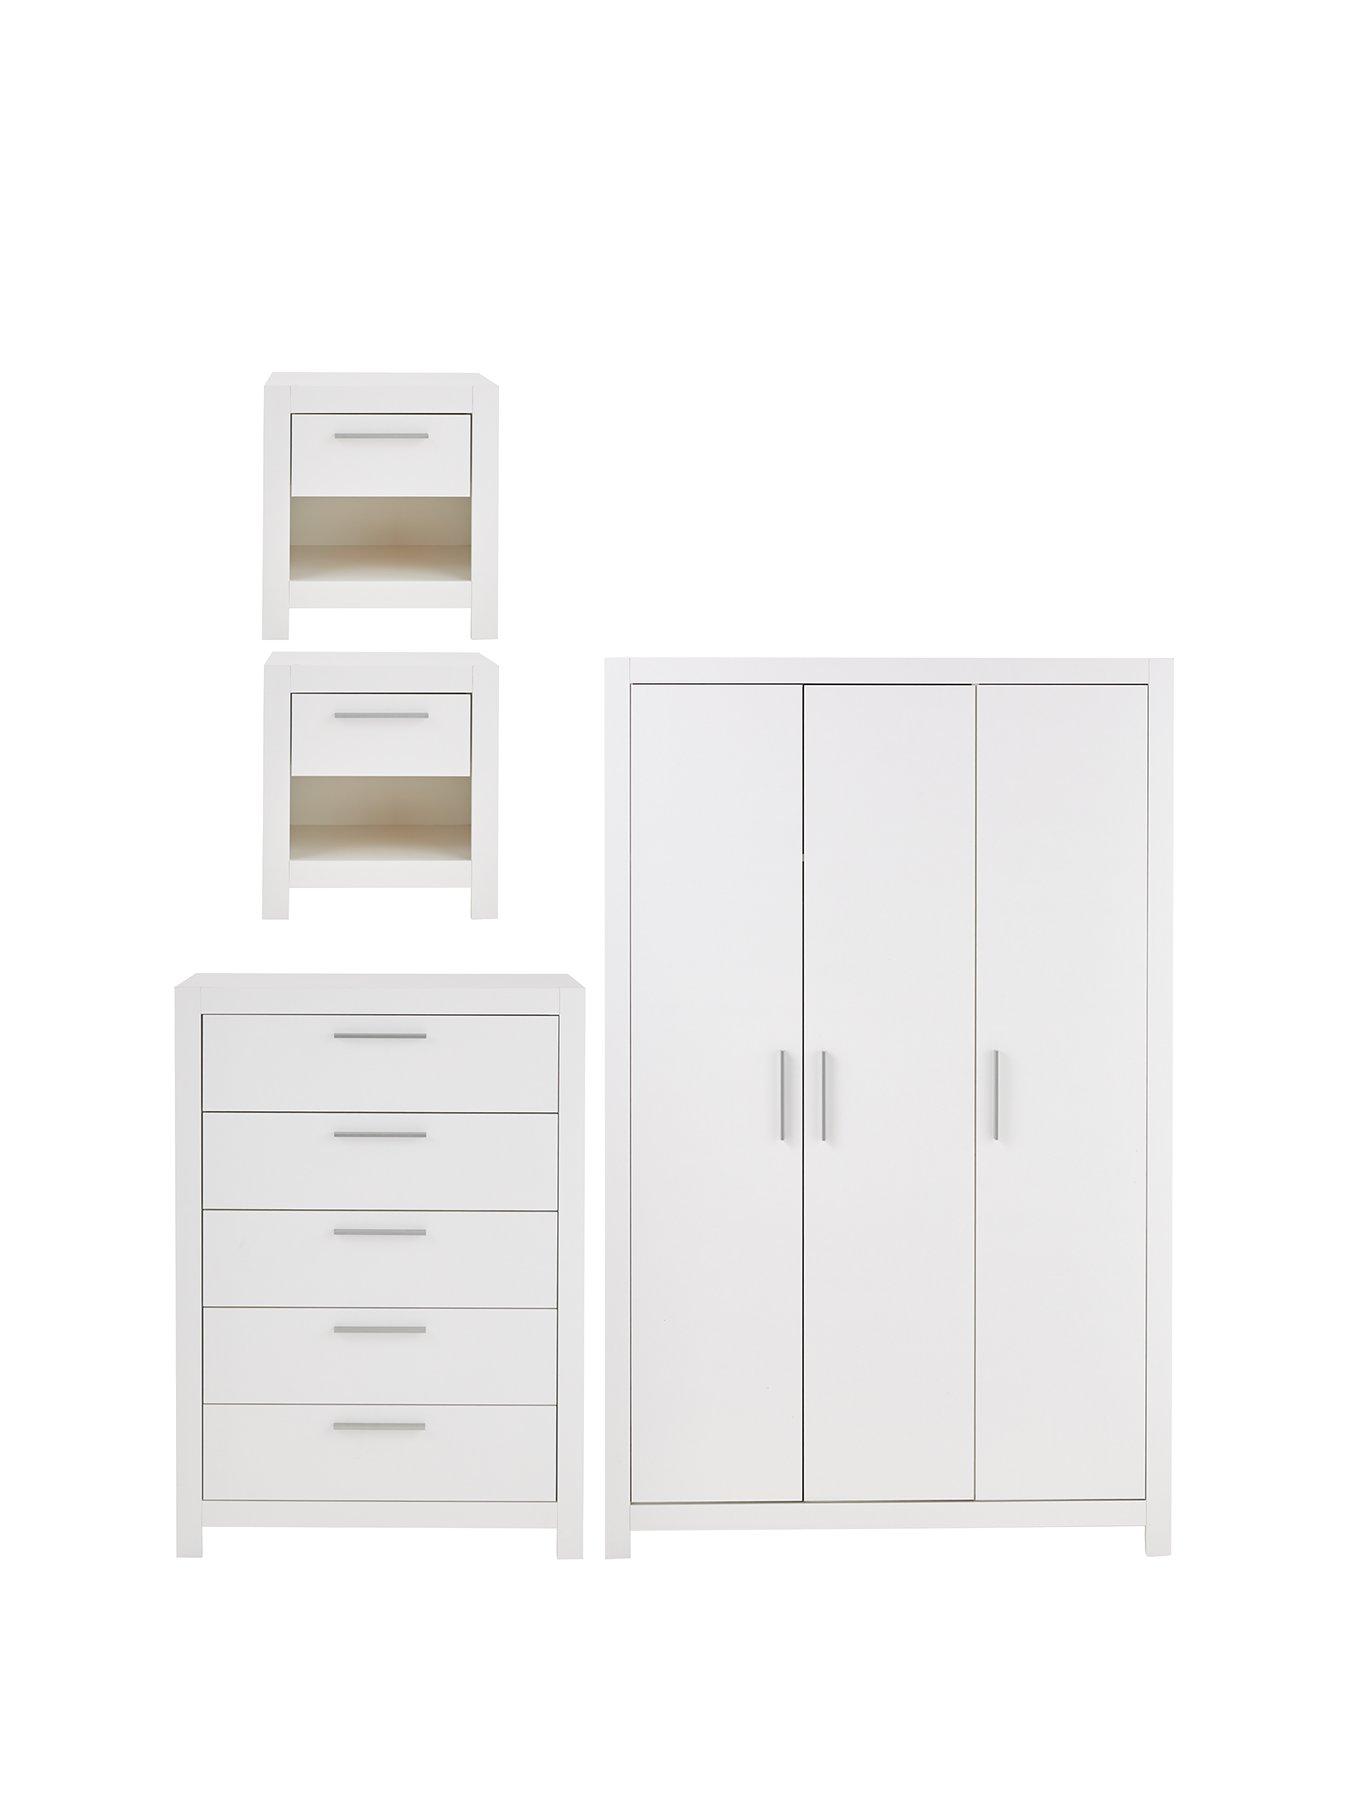 Furnituremaxi Country Style 4-Piece Wardrobe Set Bedroom Furniture Chest of Drawers Bedside Table White 